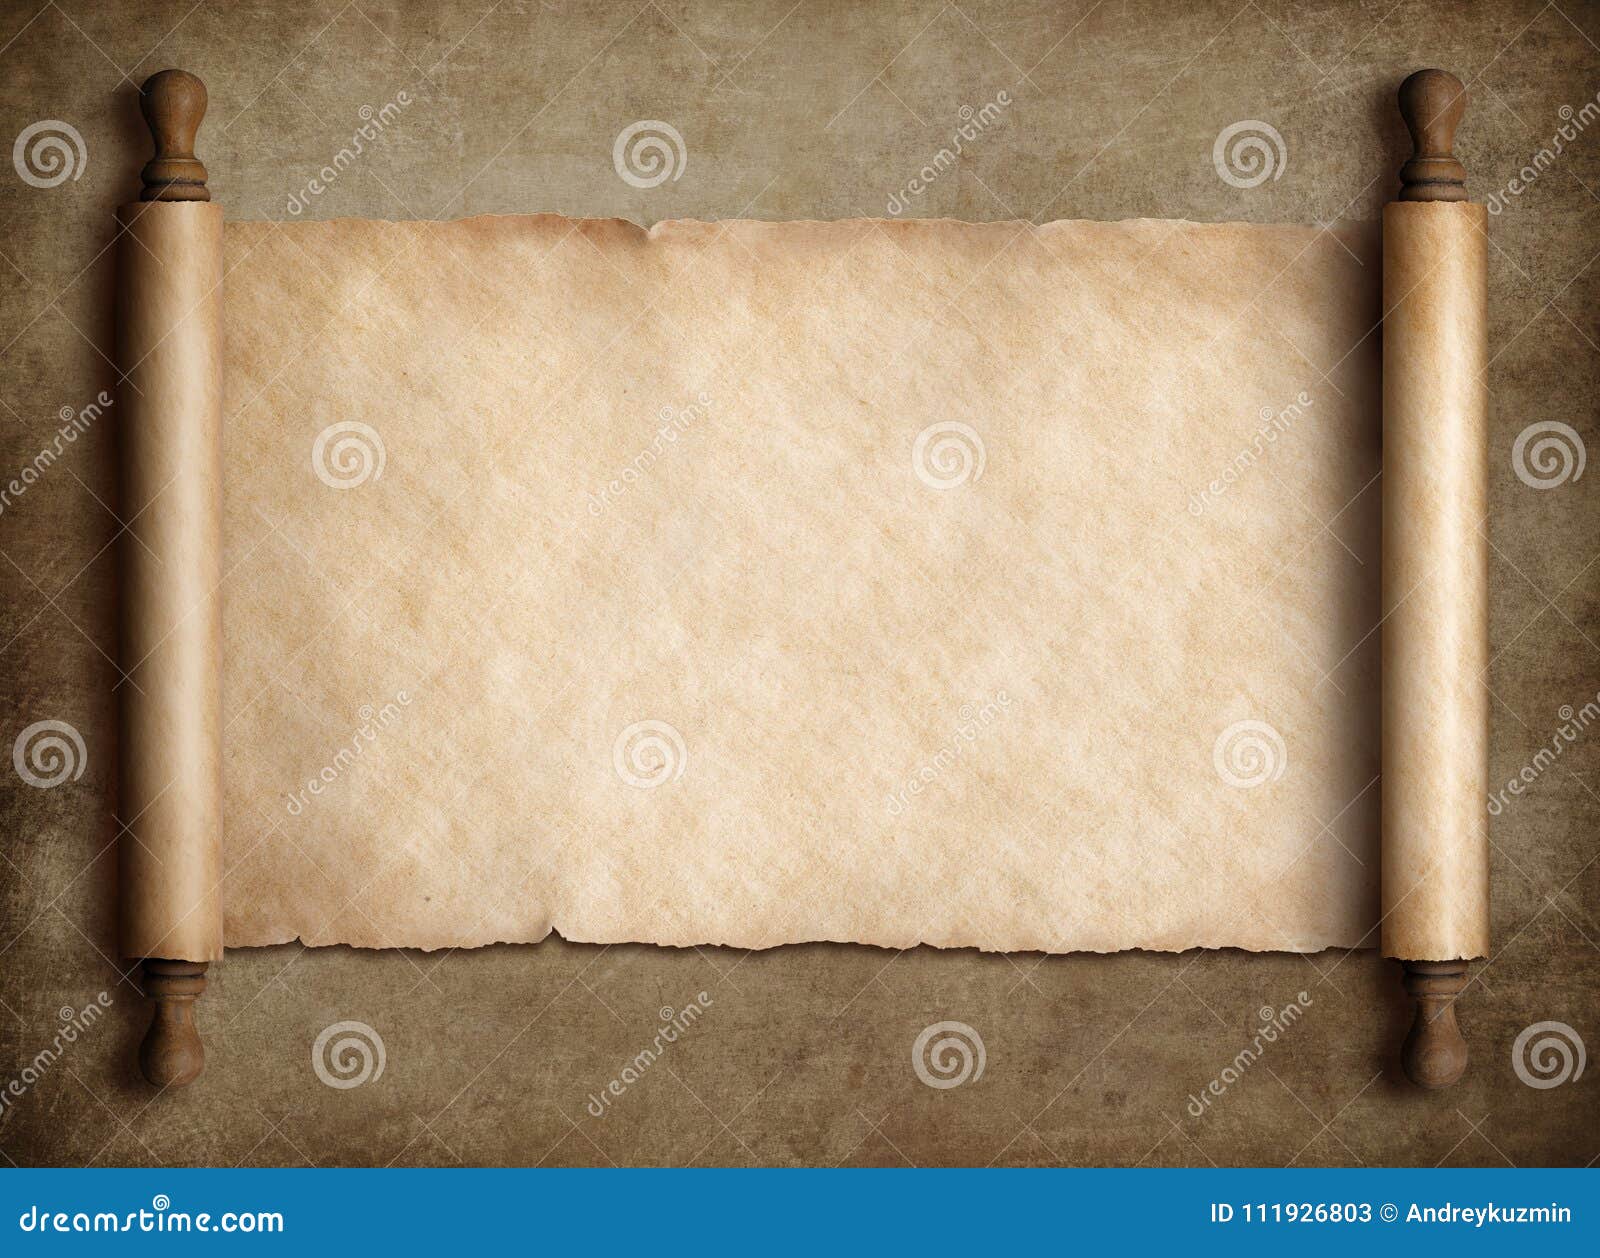 Old Paper Background Hd Discount SAVE 52